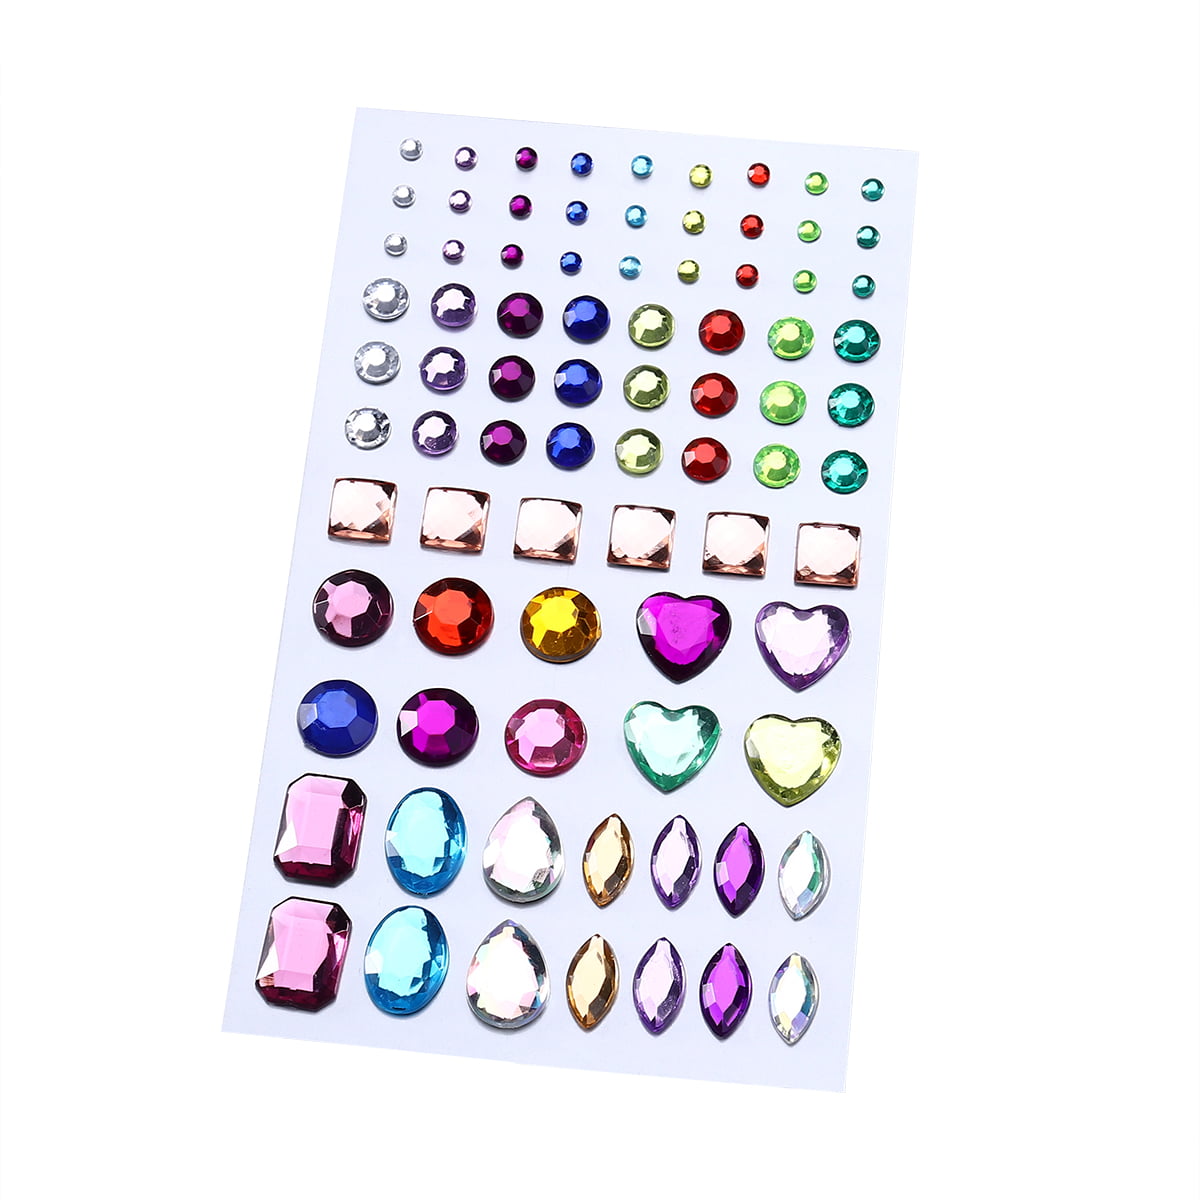 Self-adhesive Acrylic Crystal Rhinestone Jewels Gems Sticker Sheets  Assorted Colors Various Shapes (Multicolor Type 2)